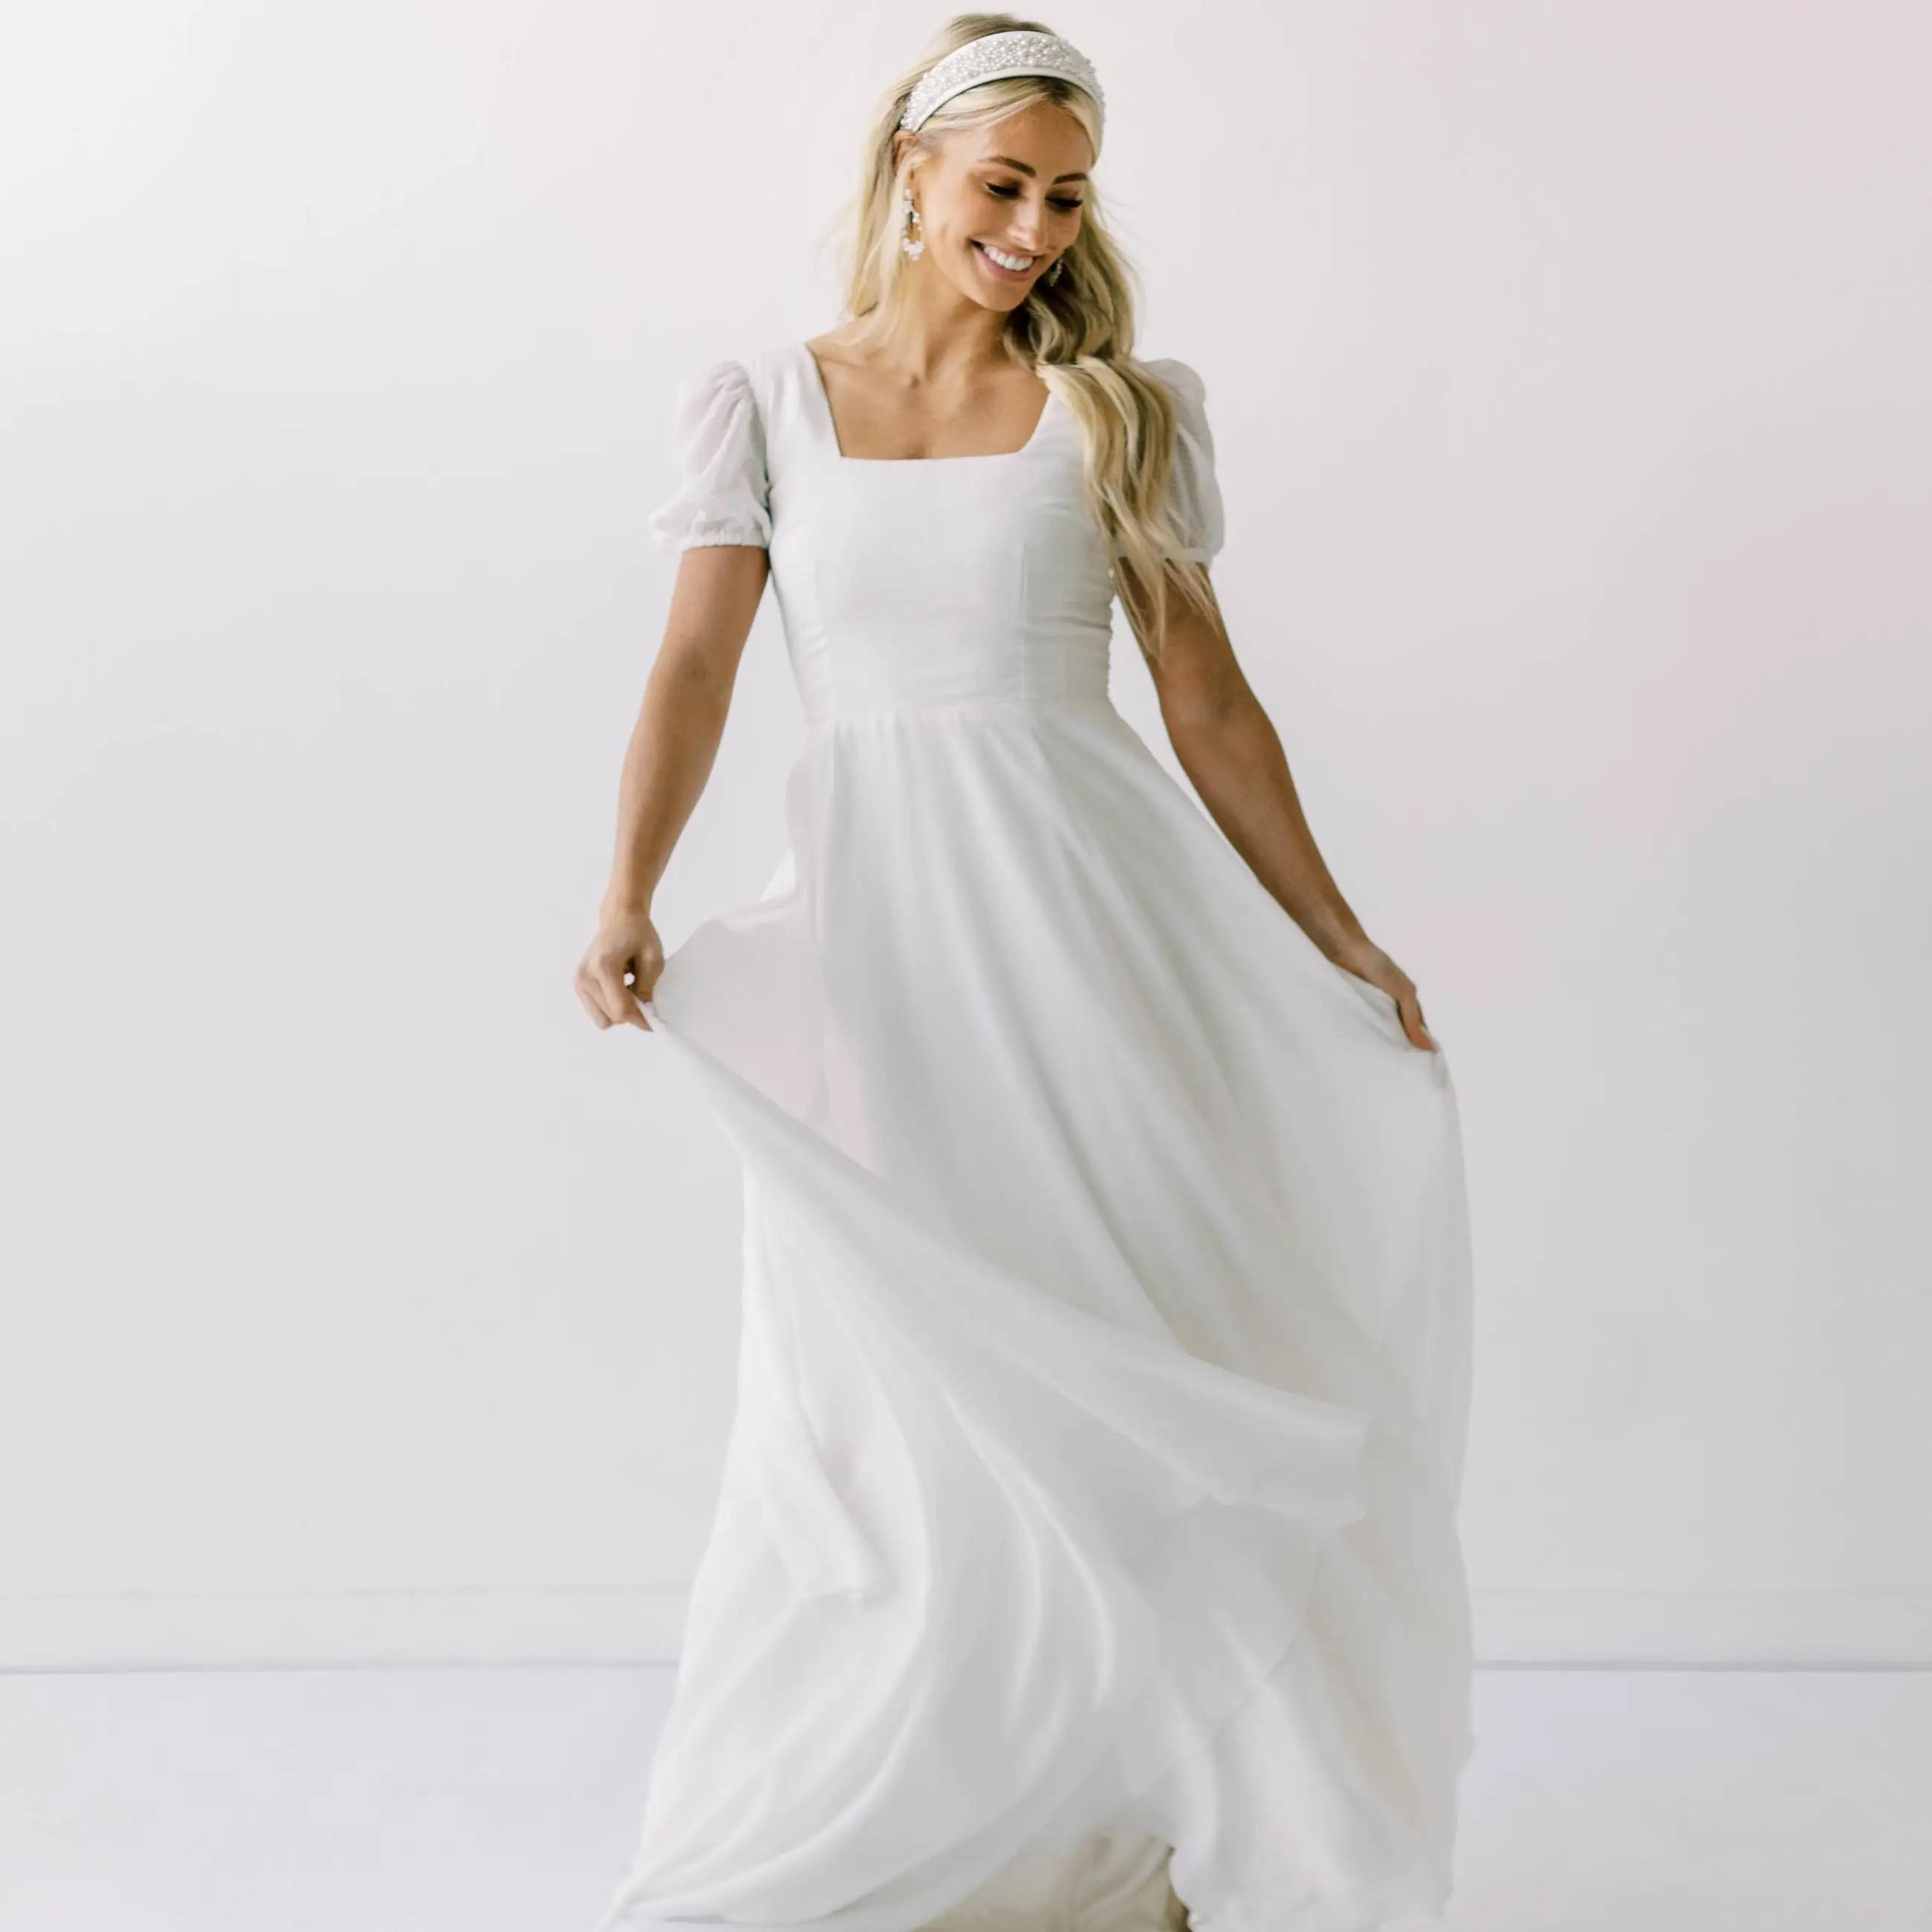 Ballgown or Mermaid? How to Pick Your Bridal Silhouette Image